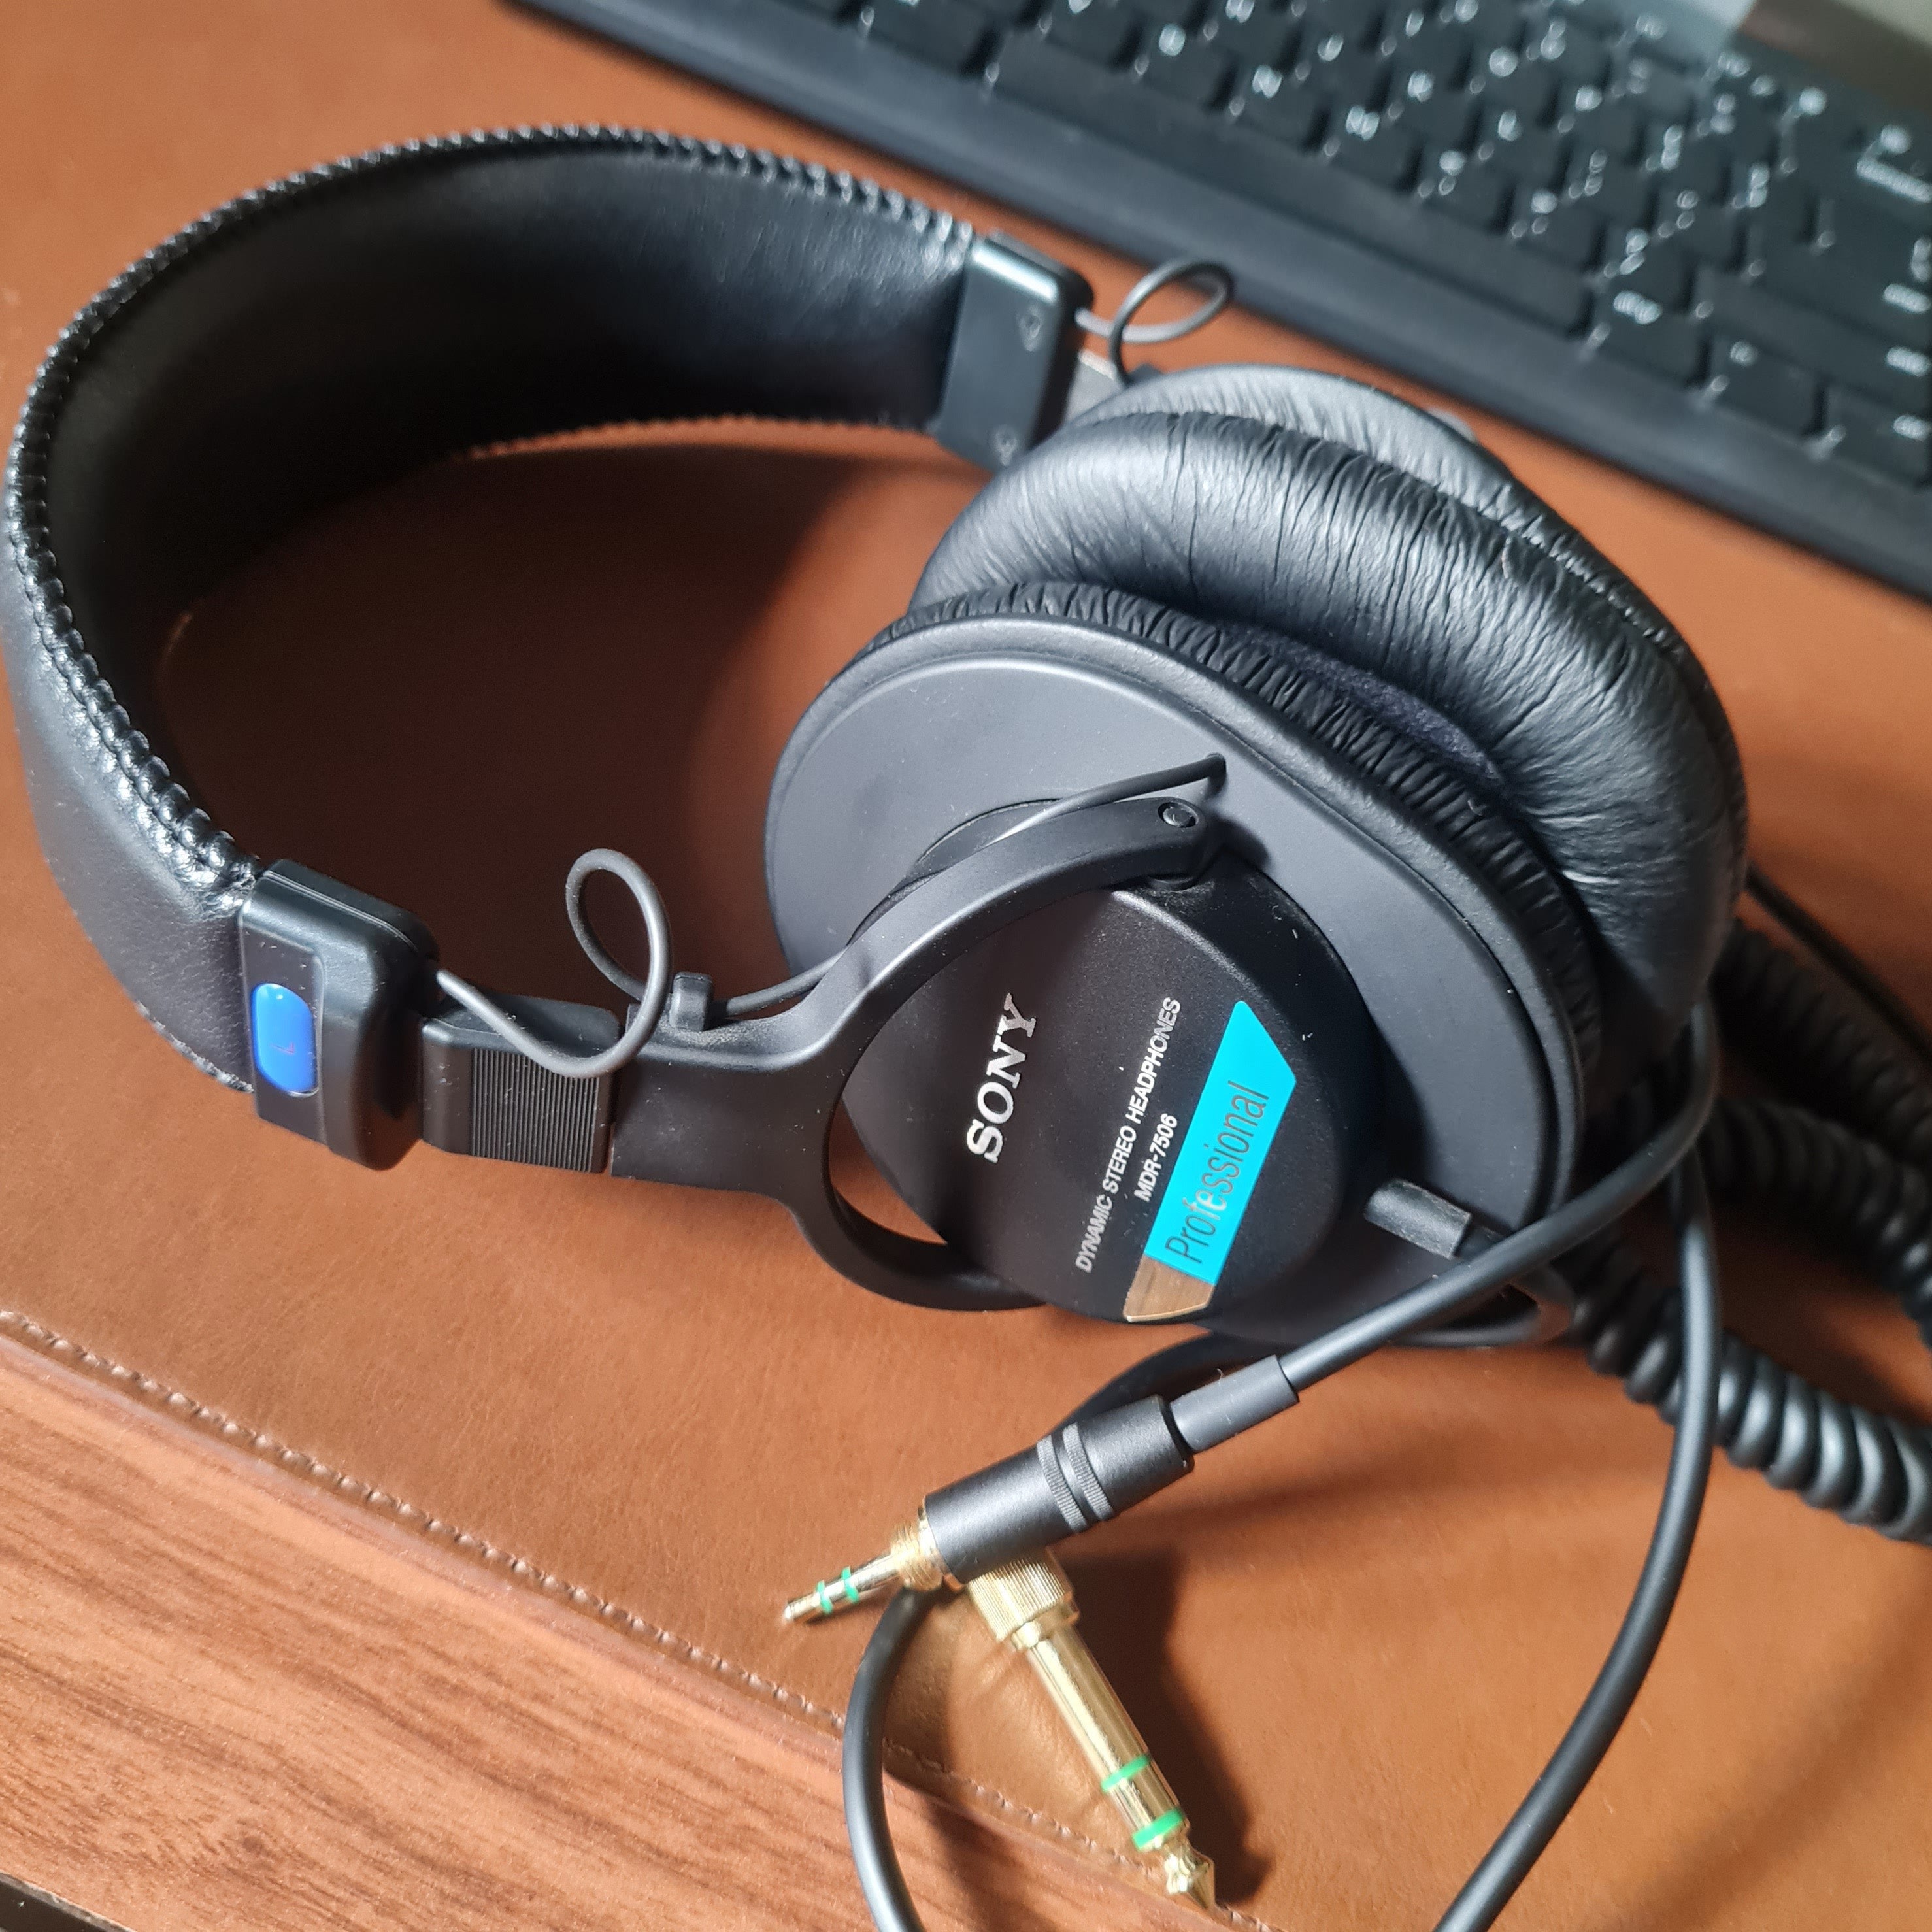 Sony - MDR-7506 (Pre-Owned)